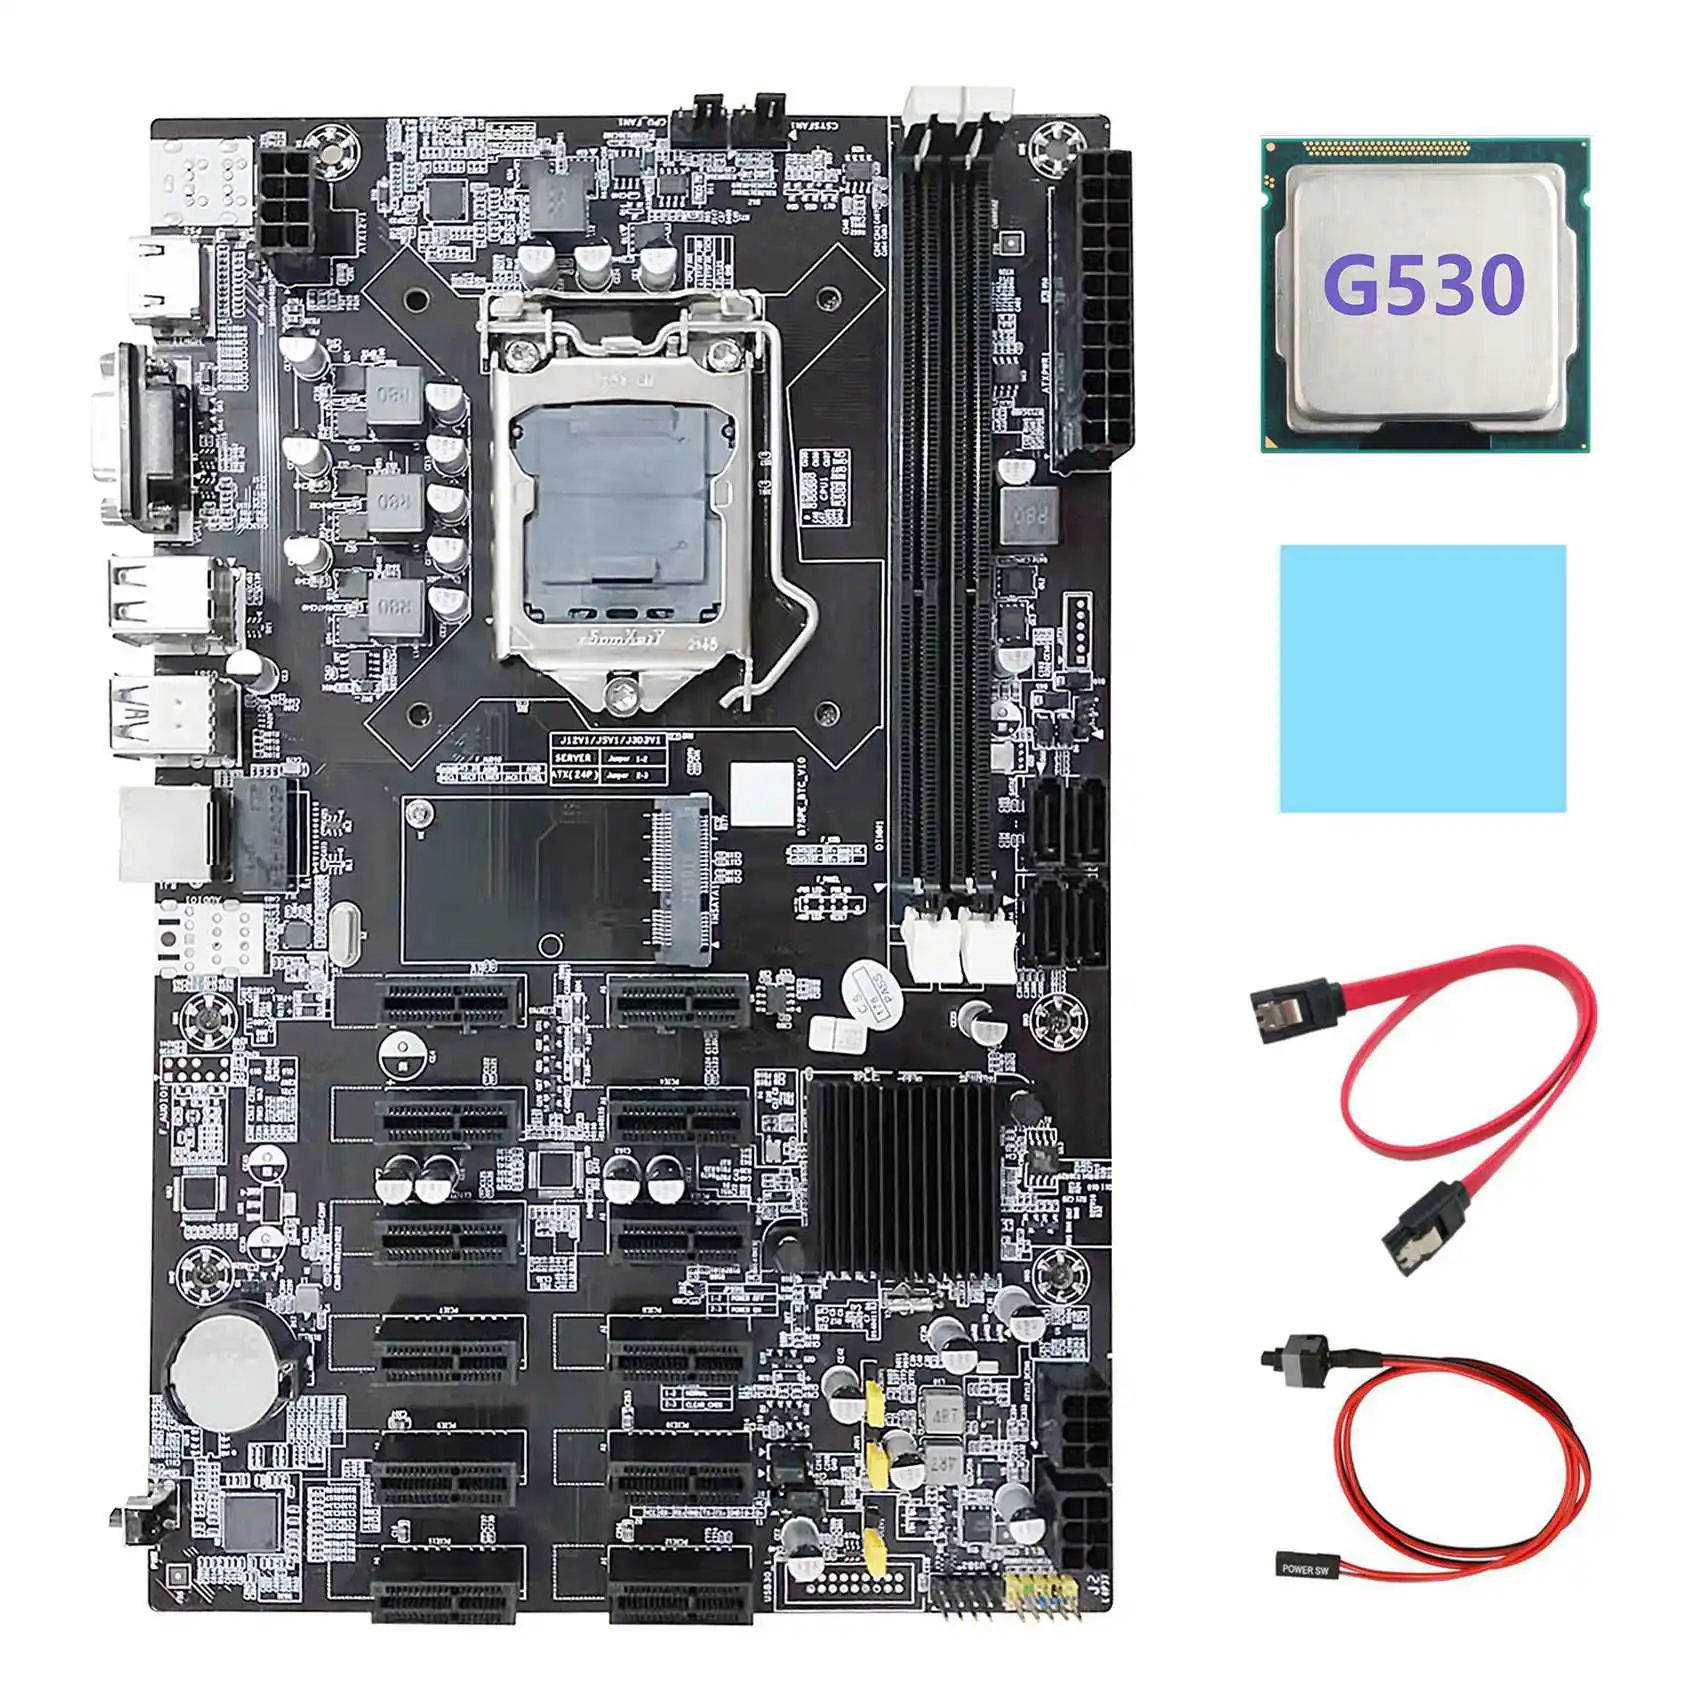 B75 ETH Mining Motherboard 12 PCIE+G530 CPU+SATA Cable+Switch Cable+Thermal Pad LGA1155 B75 BTC Miner Motherboard